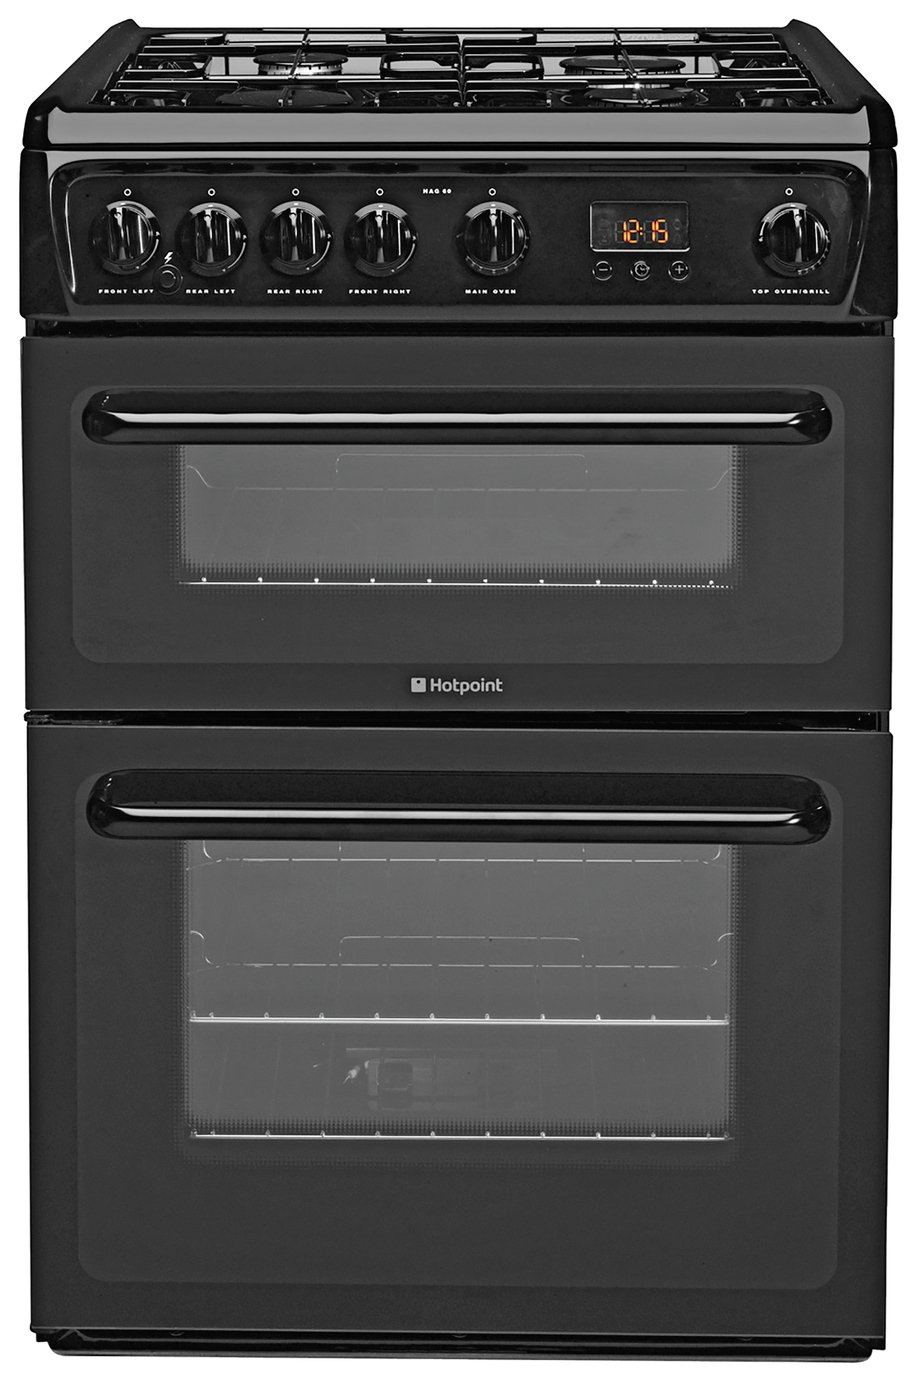 Hotpoint HAG60K 60cm Double Oven Gas Cooker - Black